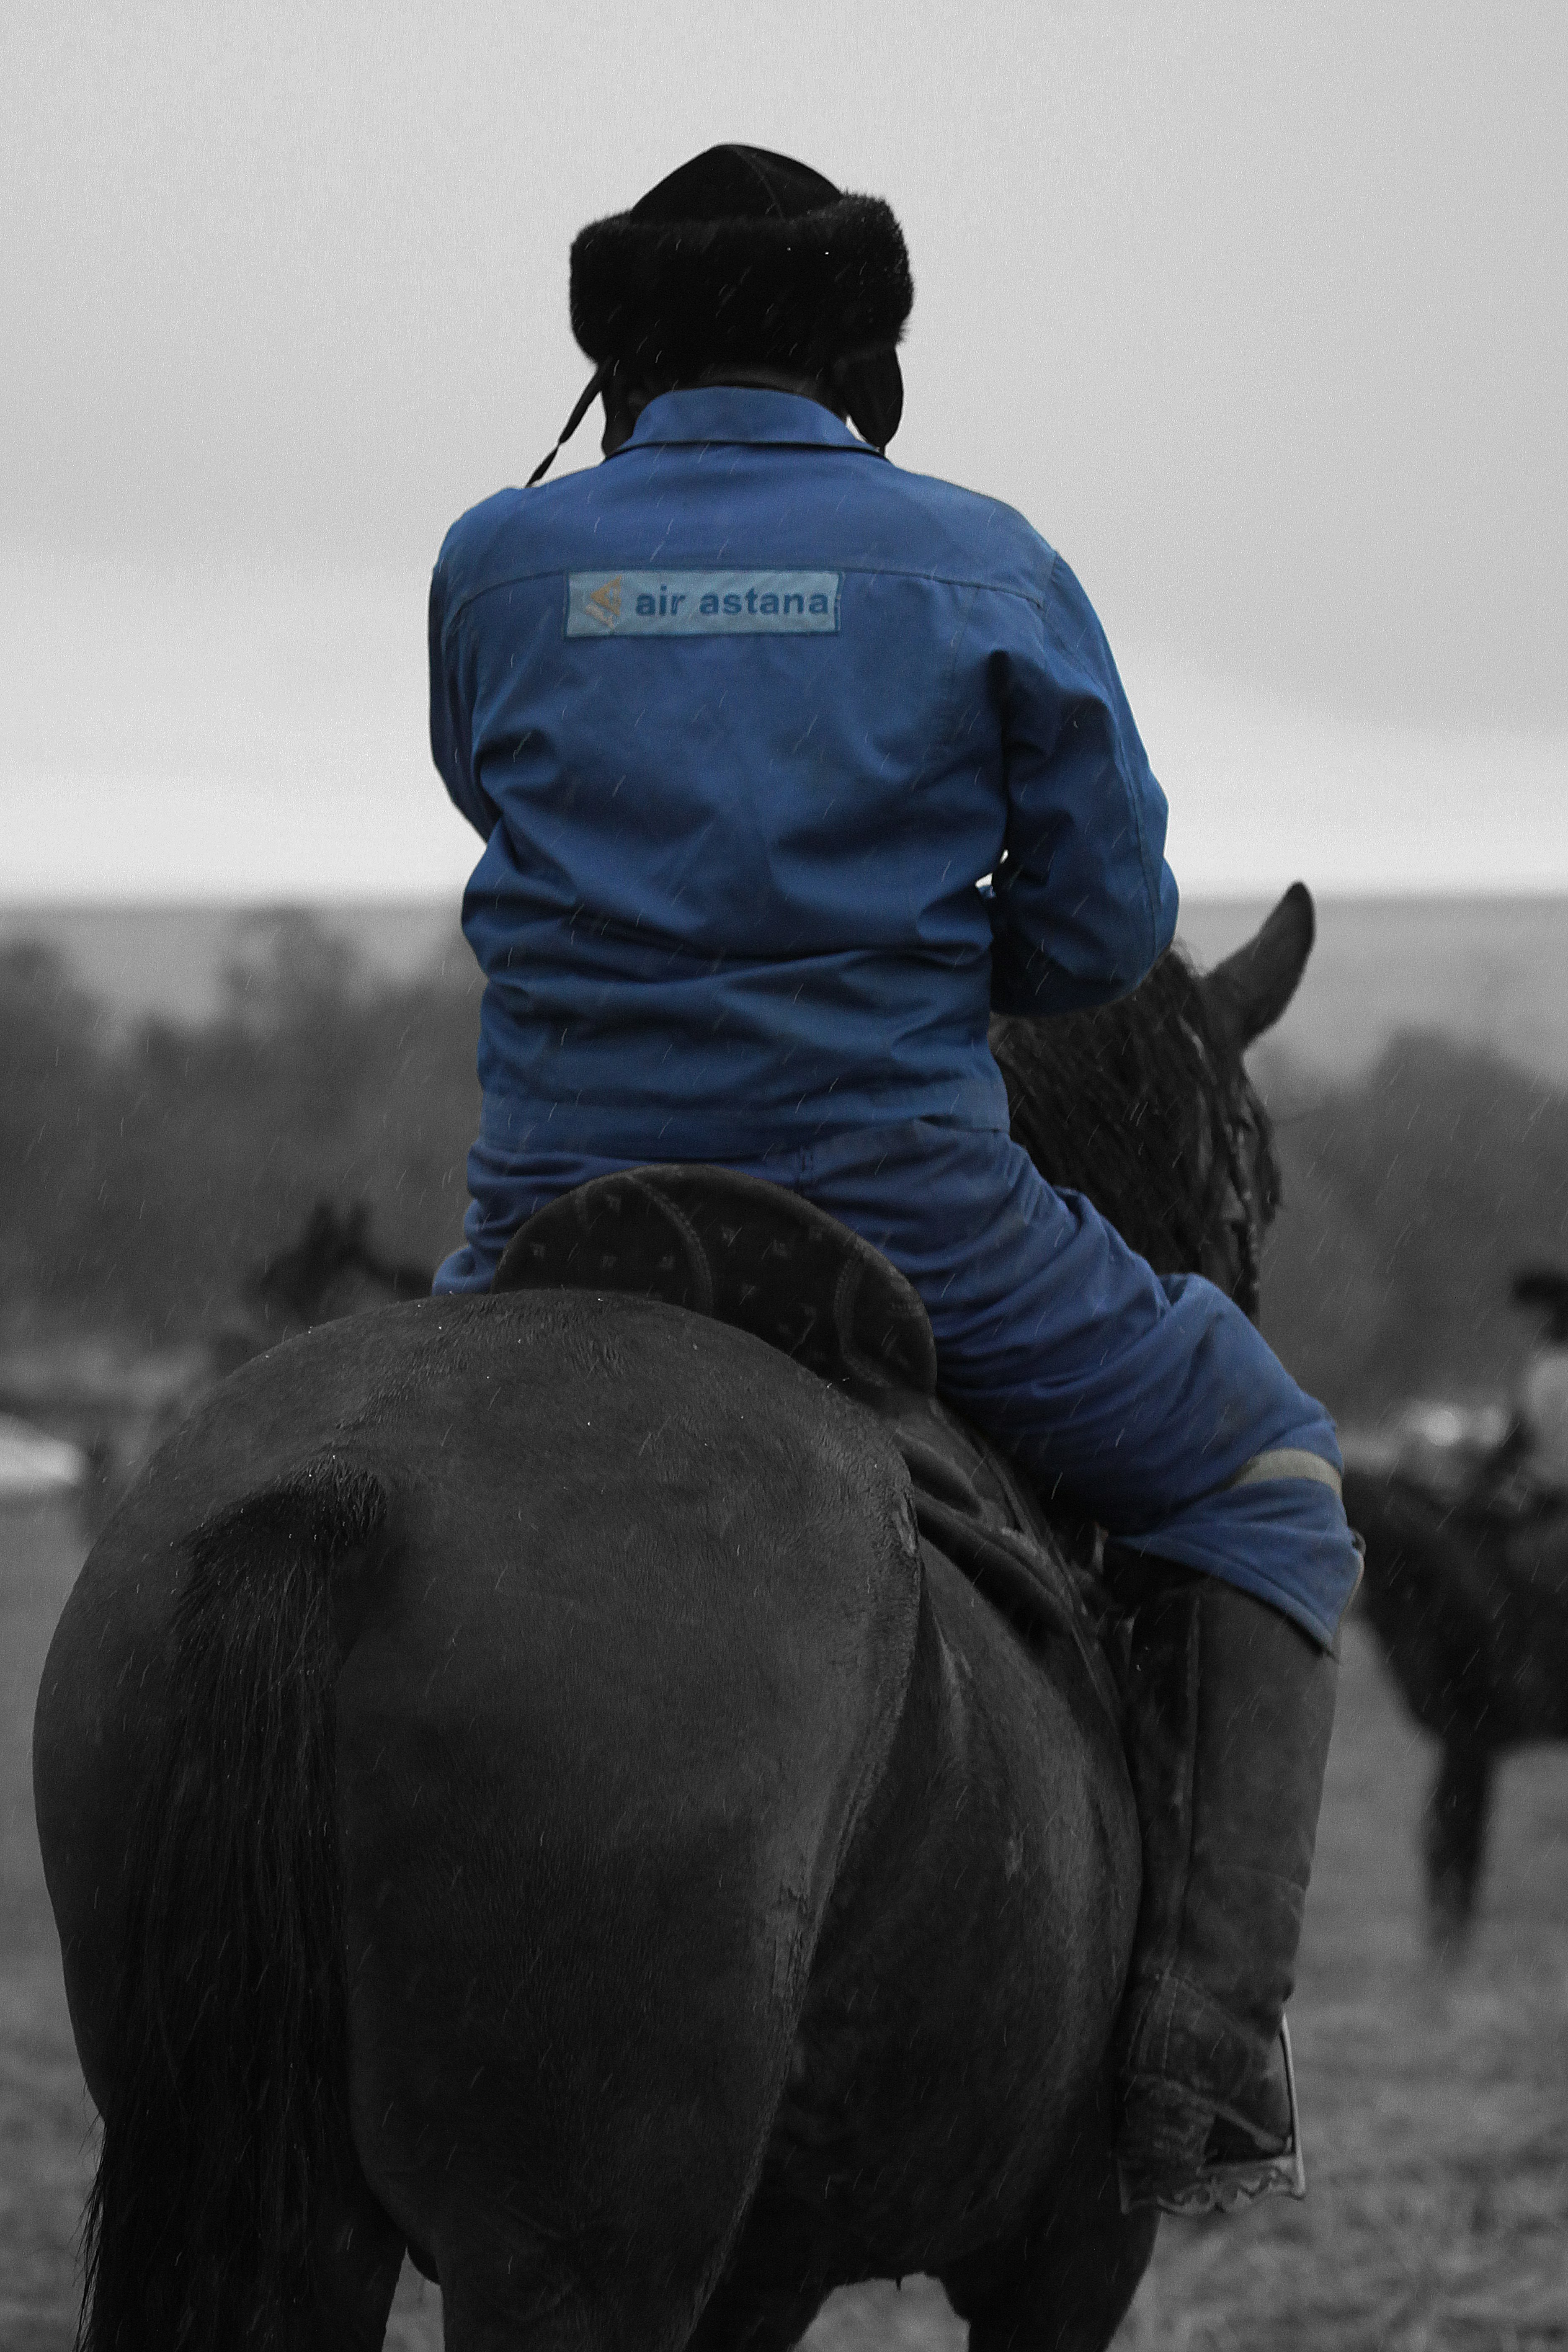 Someone on the back of a black horse facing away from camera. They are wearing a blue full body suit and a black hat.